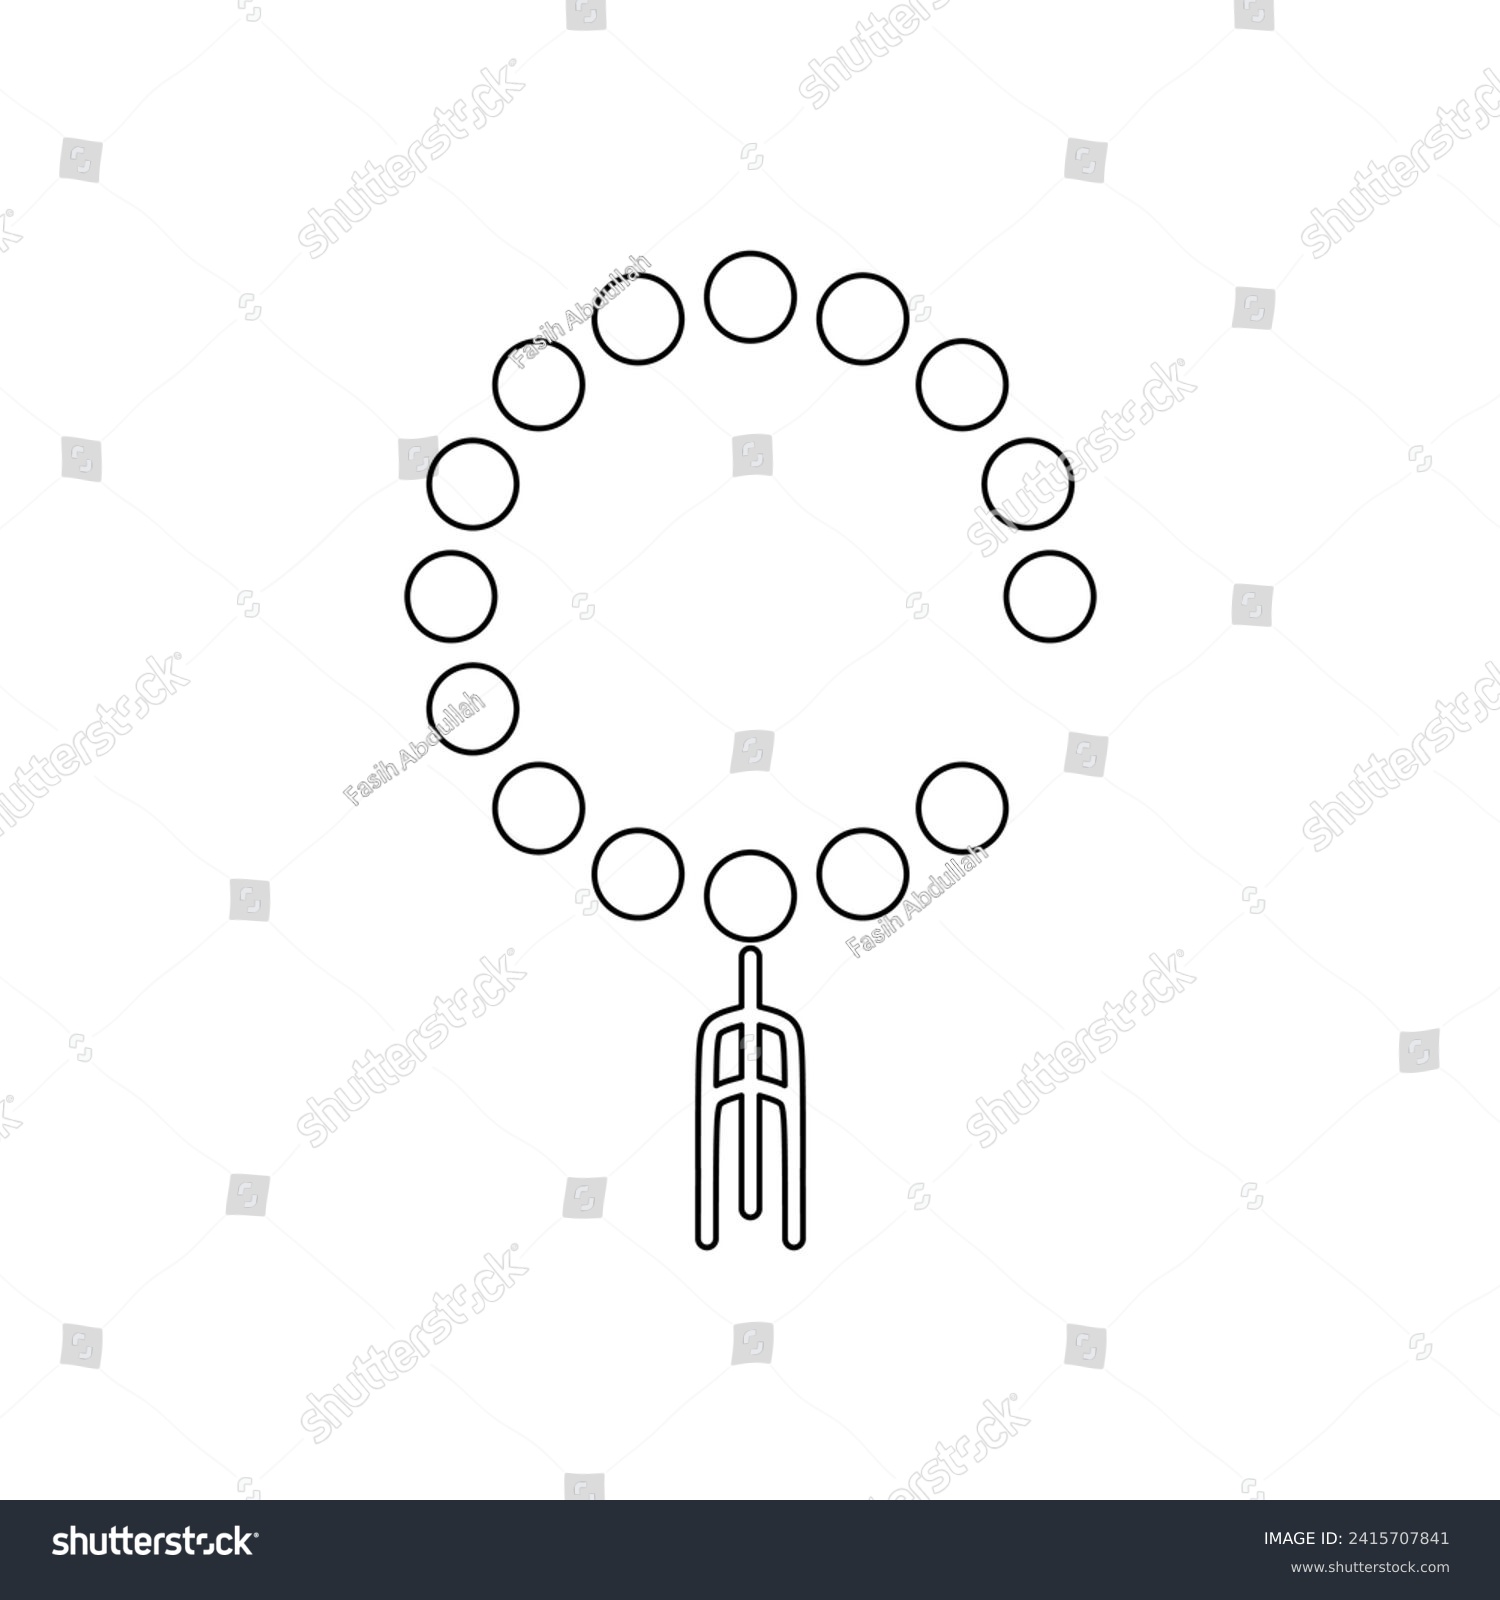 SVG of Prayer breads or tasbih or tasbeeh islamic rosary outline icon in trendy style. Ramadan graphic resources for many purposes. svg